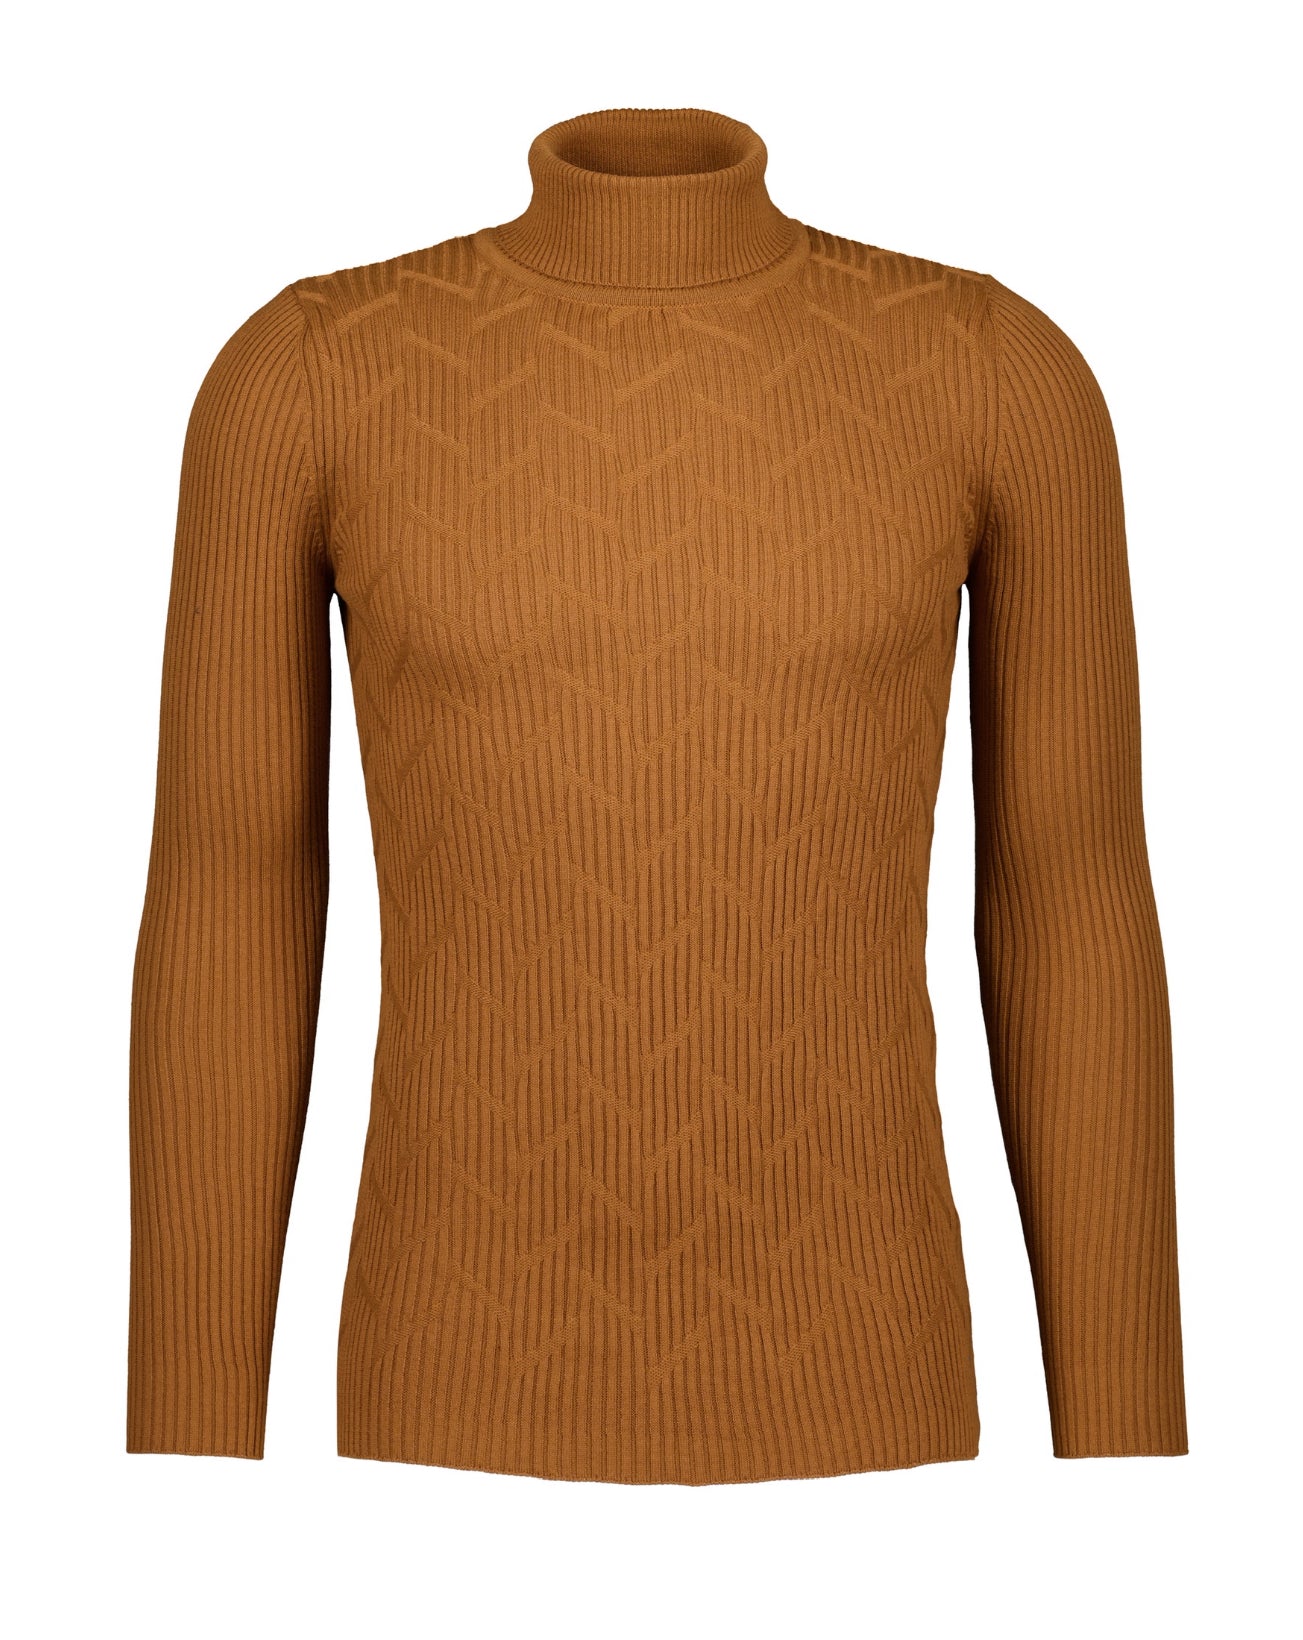 Abstract Knit Turtleneck Sweater -  Tan - Sweater by Urbbana